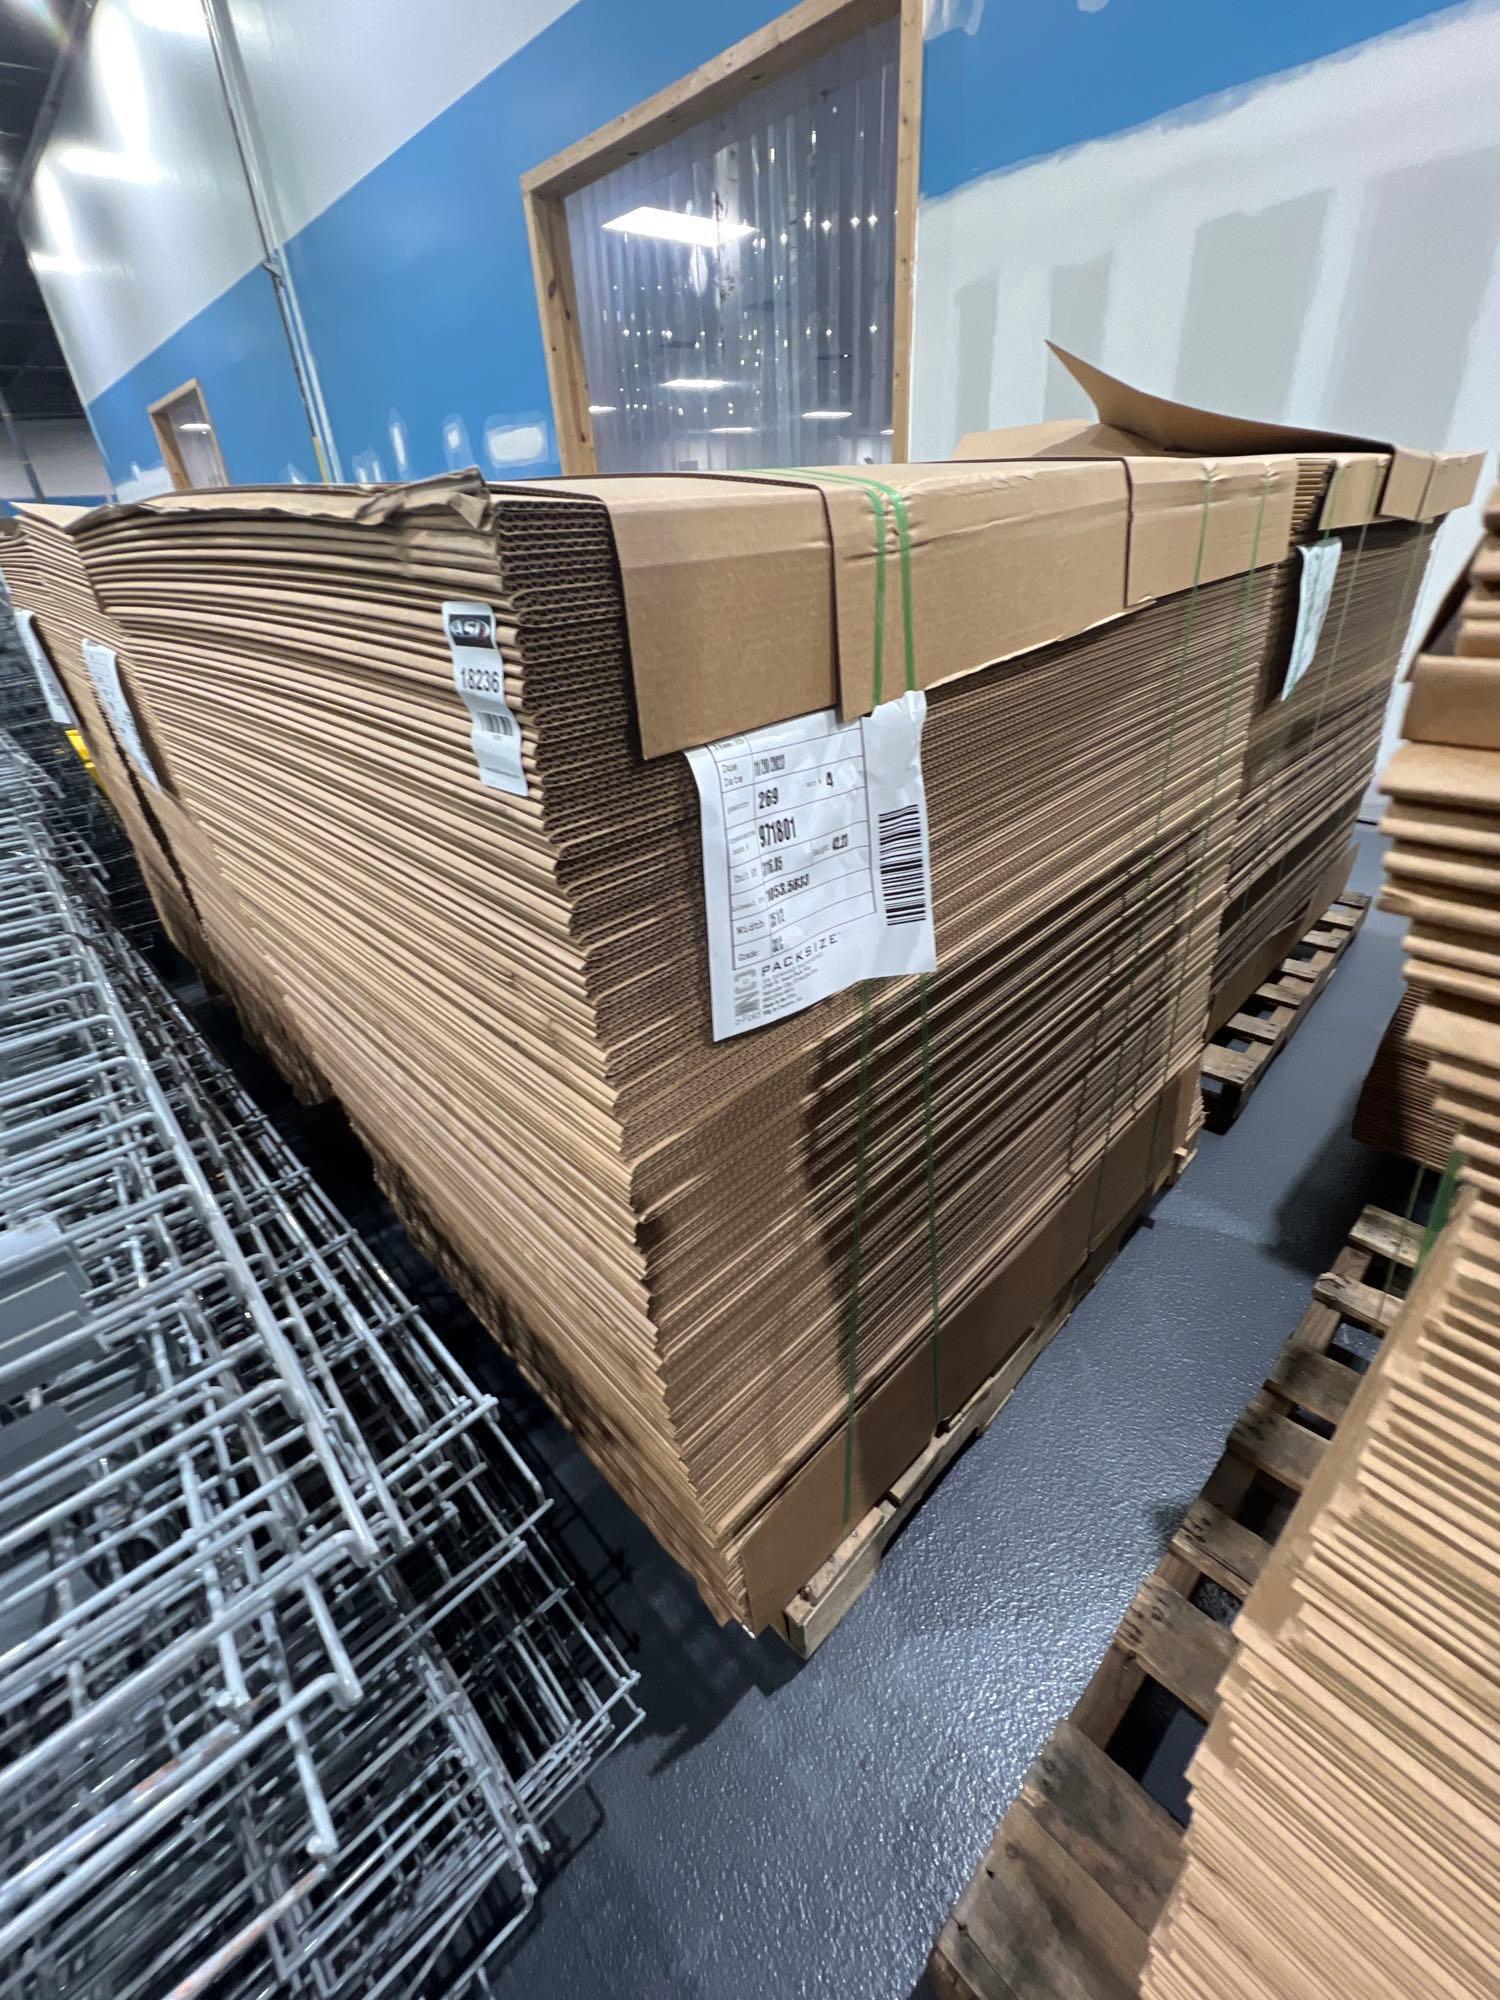 QTY 4) FULL PALLETS OF 35 1/2€� "Z FOLD" BOXES, APPROX. 269 BOXES PER FULL PALLET